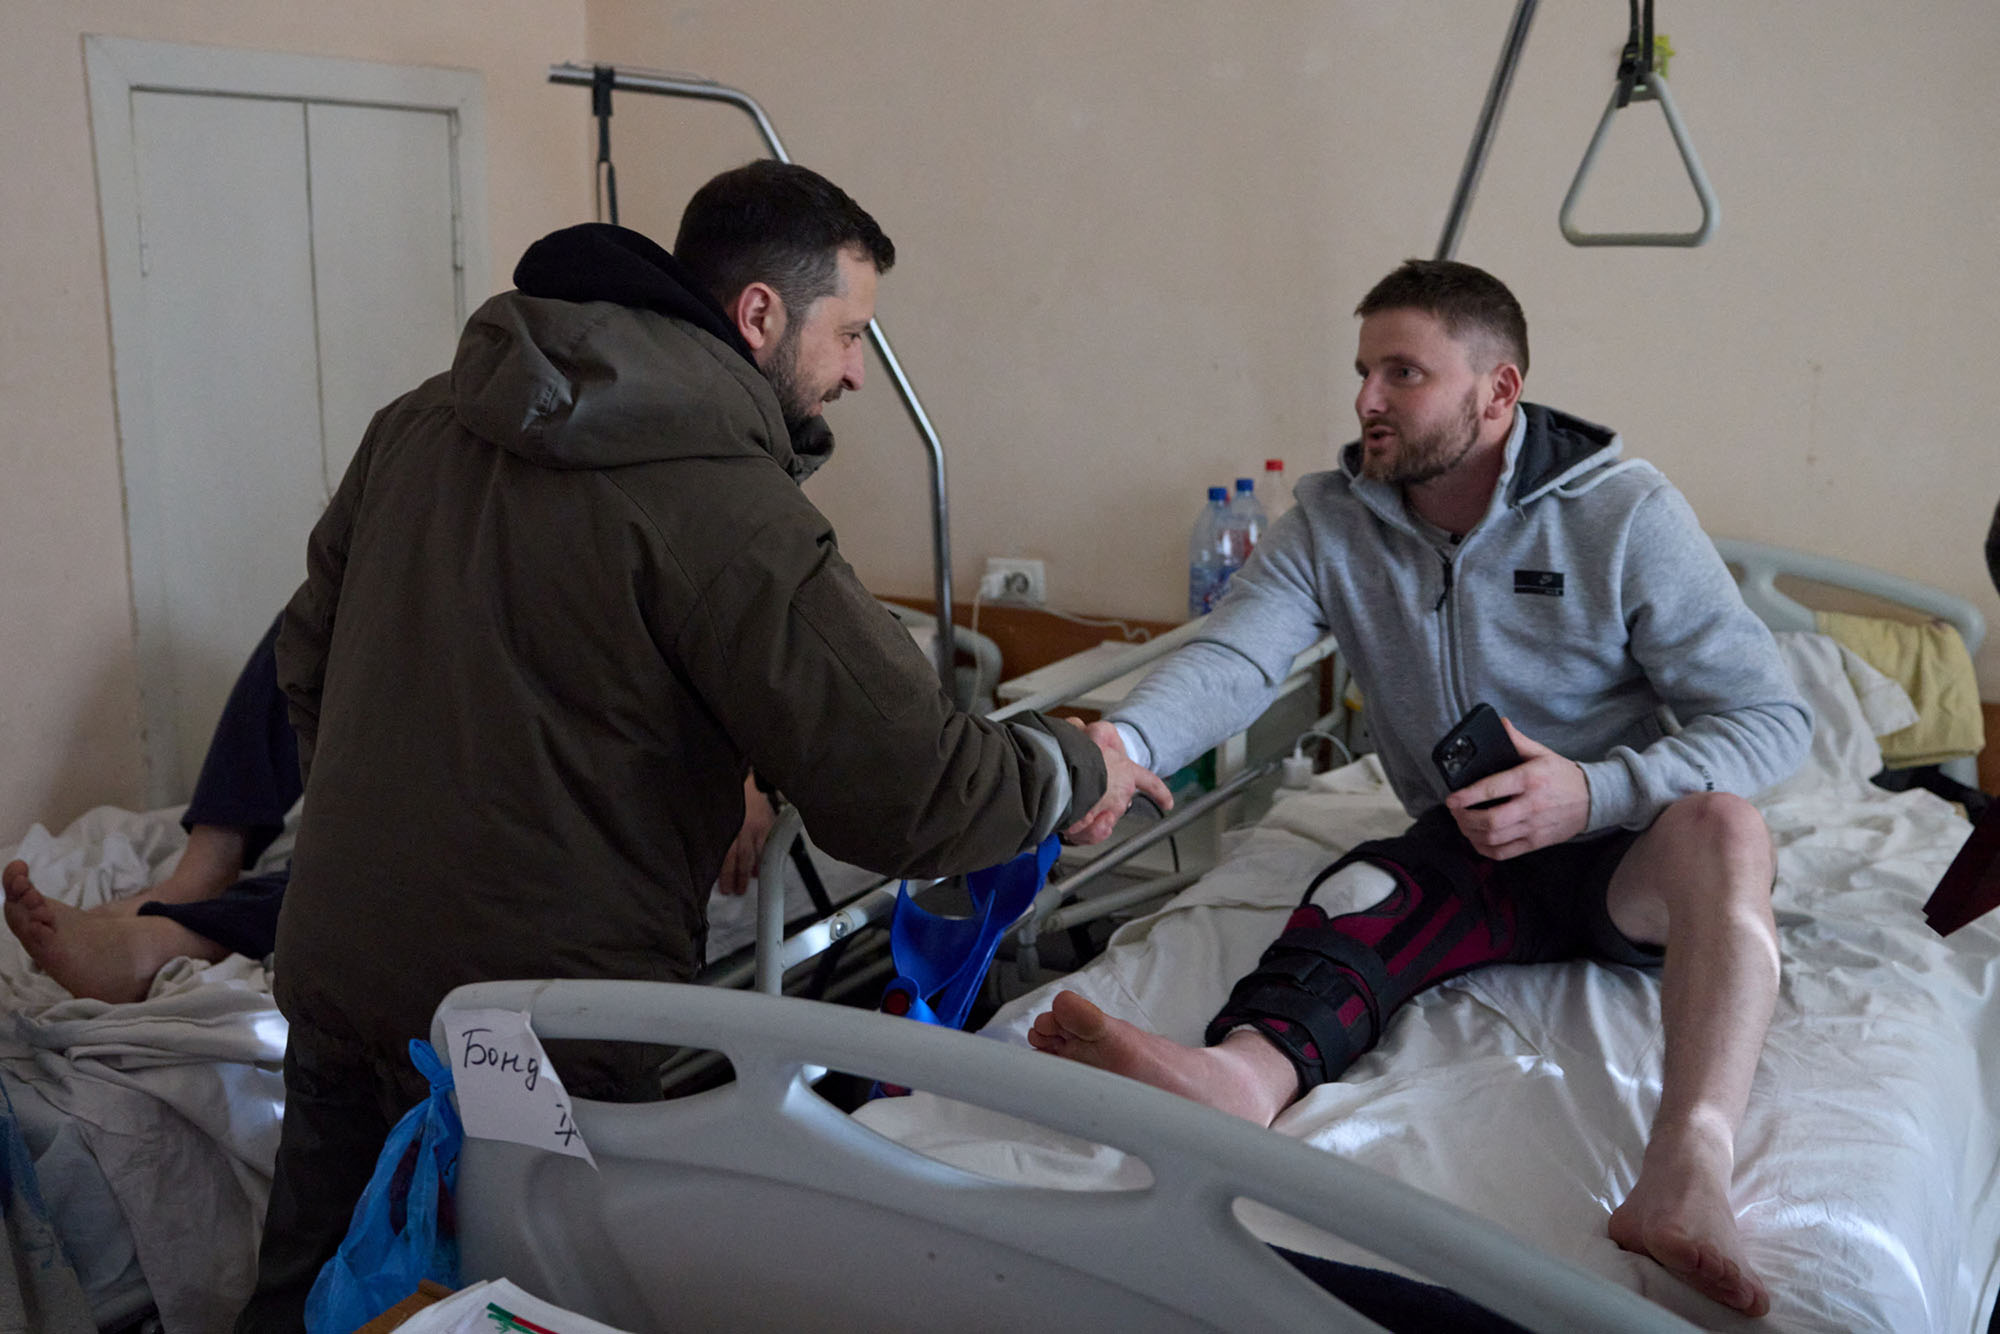 Ukraine's President Volodymyr Zelensky shakes hands with an injured service member as he visits a hospital on the Day of the Ukrainian Armed Forces, in Kharkiv, Ukraine, on December 6.